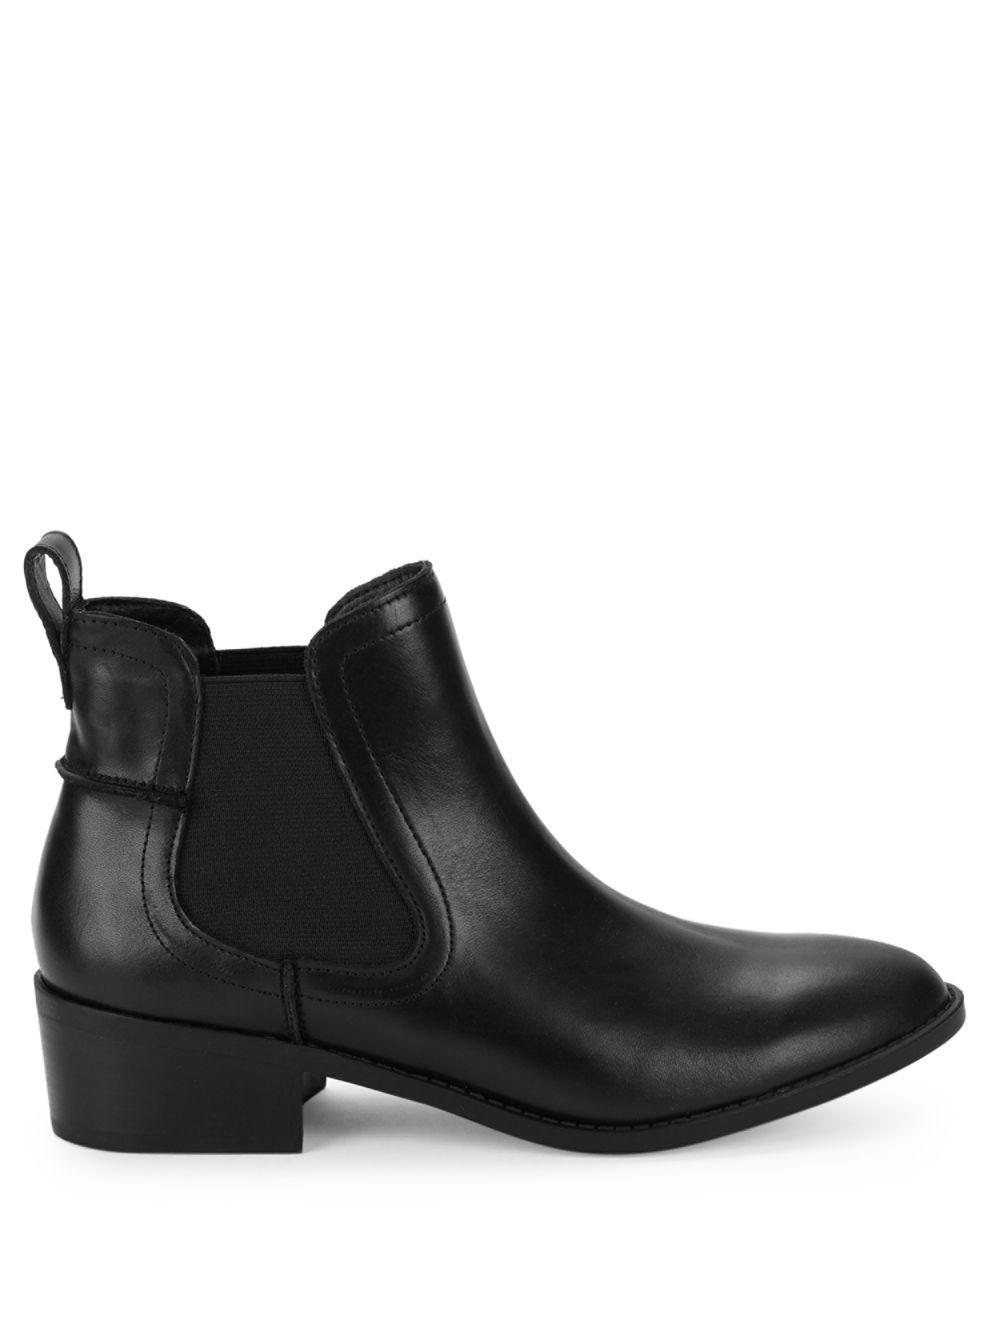 womens chelsea style boots